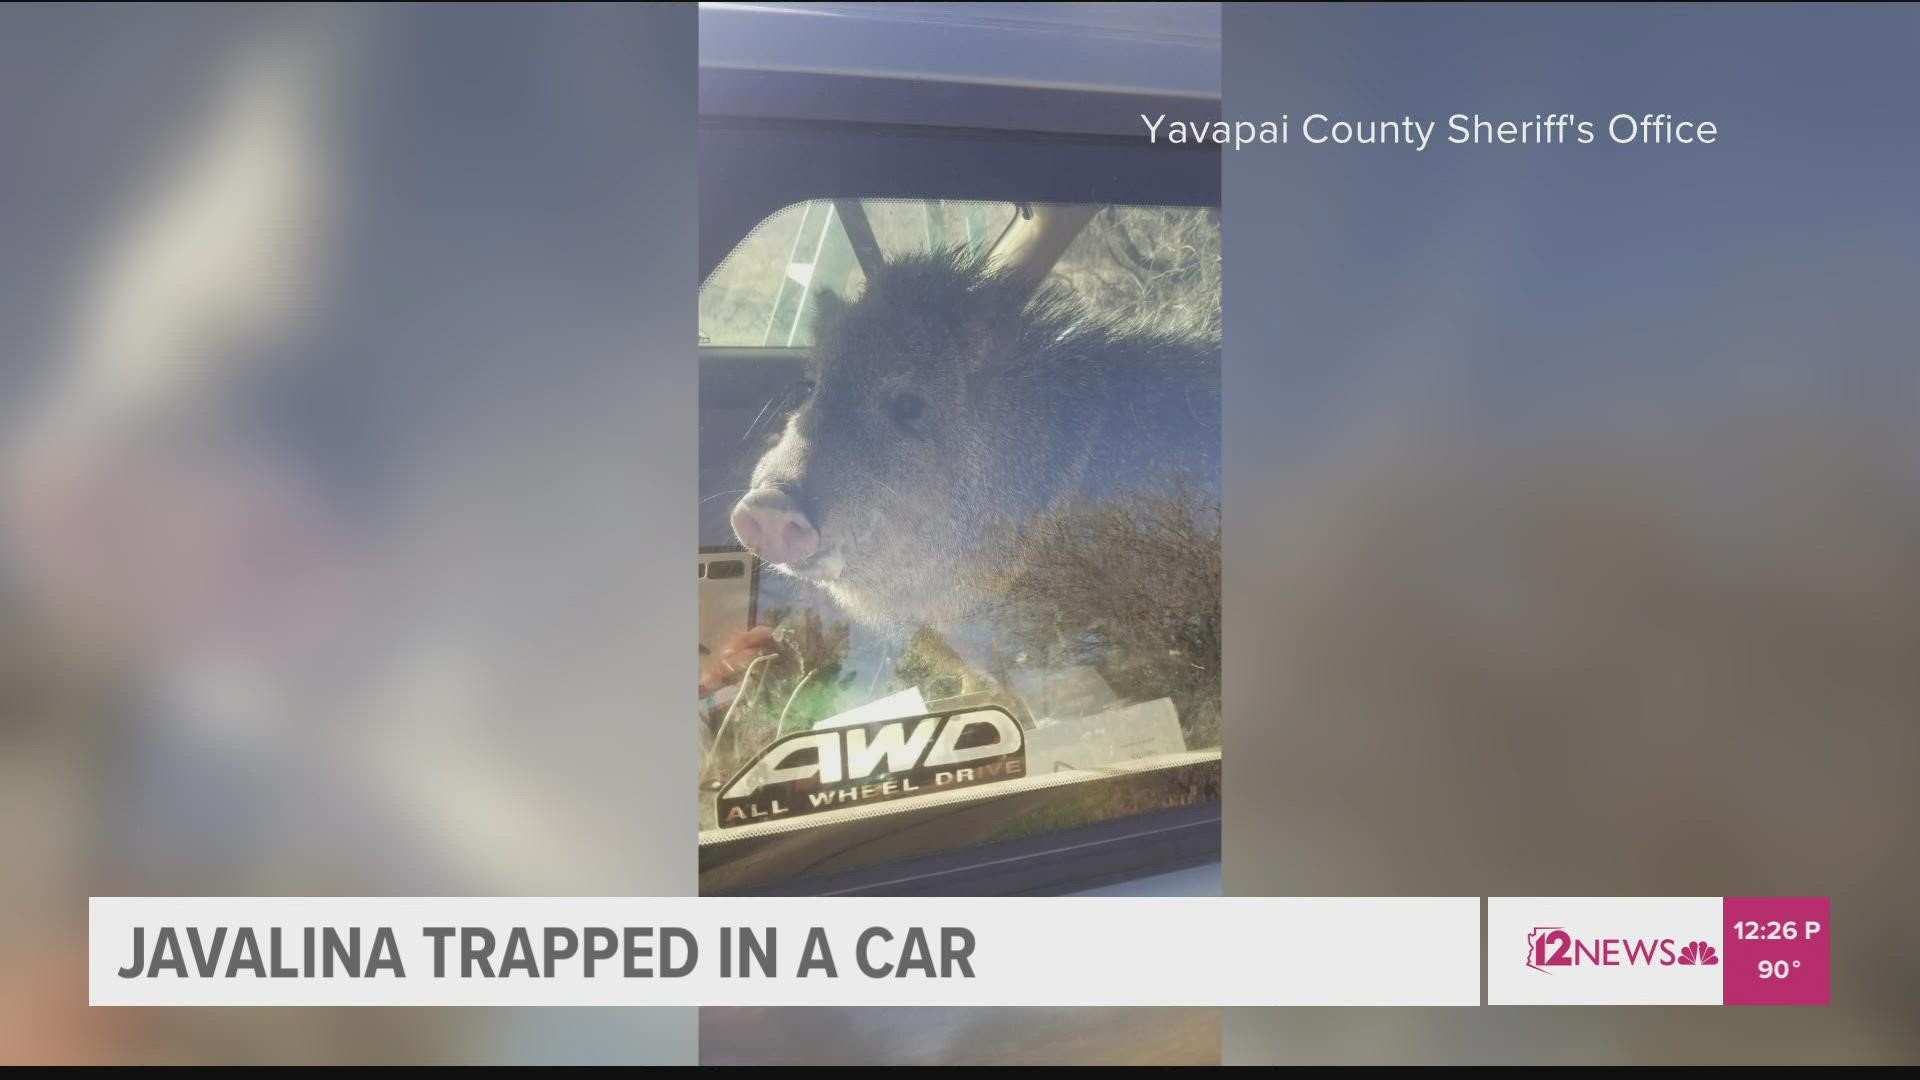 A javelina jumped into a car in Cornville, Arizona recently and we have plenty of questions. Here's the full story.